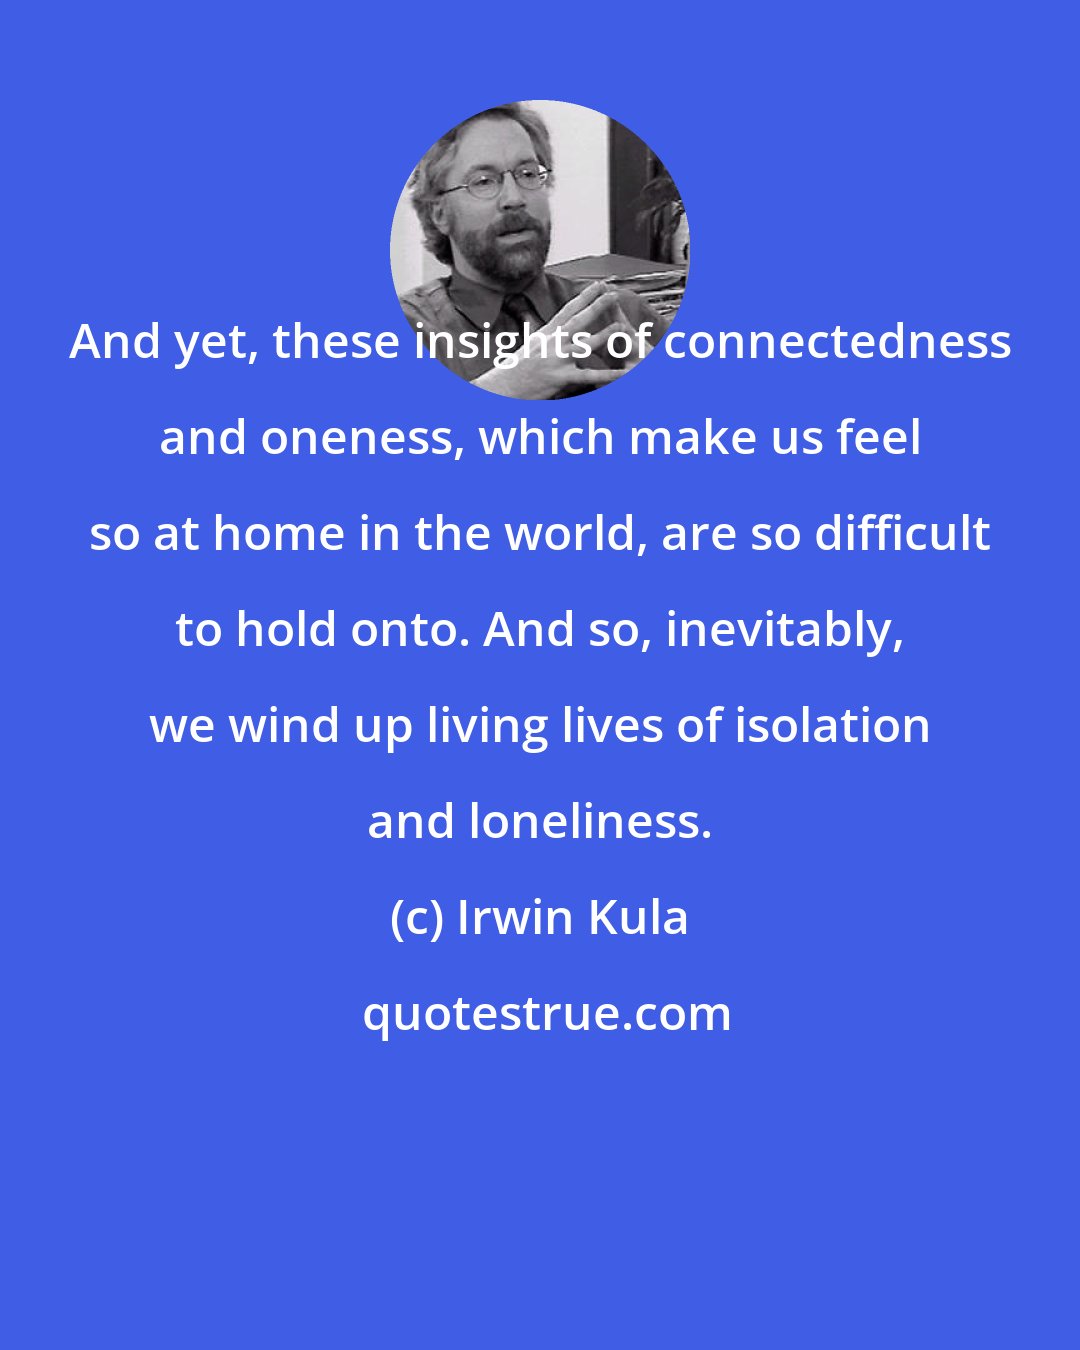 Irwin Kula: And yet, these insights of connectedness and oneness, which make us feel so at home in the world, are so difficult to hold onto. And so, inevitably, we wind up living lives of isolation and loneliness.